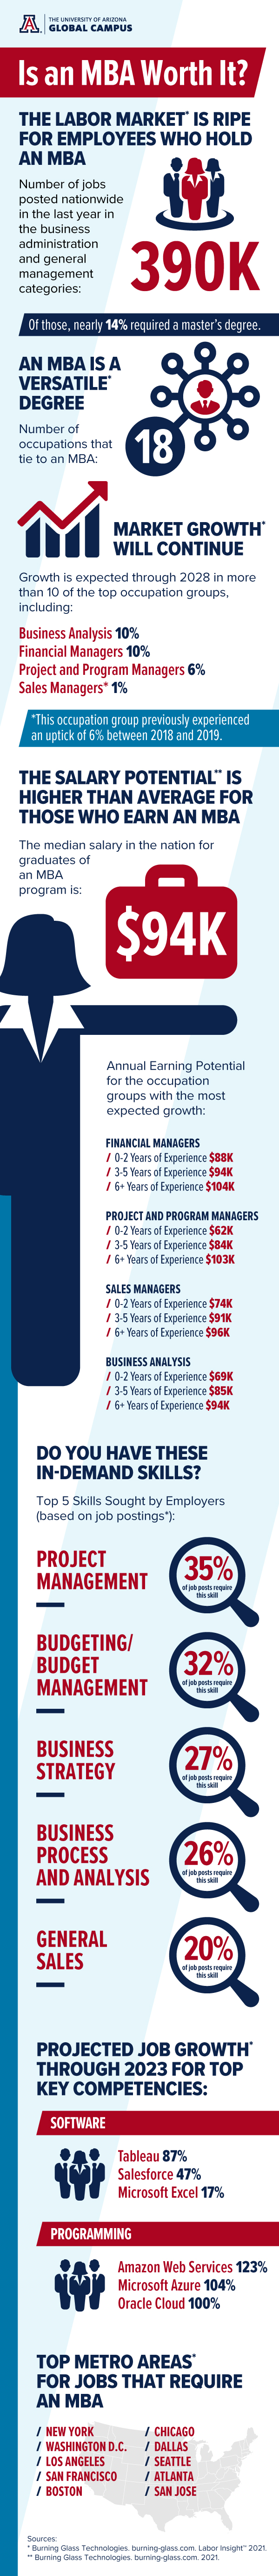 is an mba worth it infographic